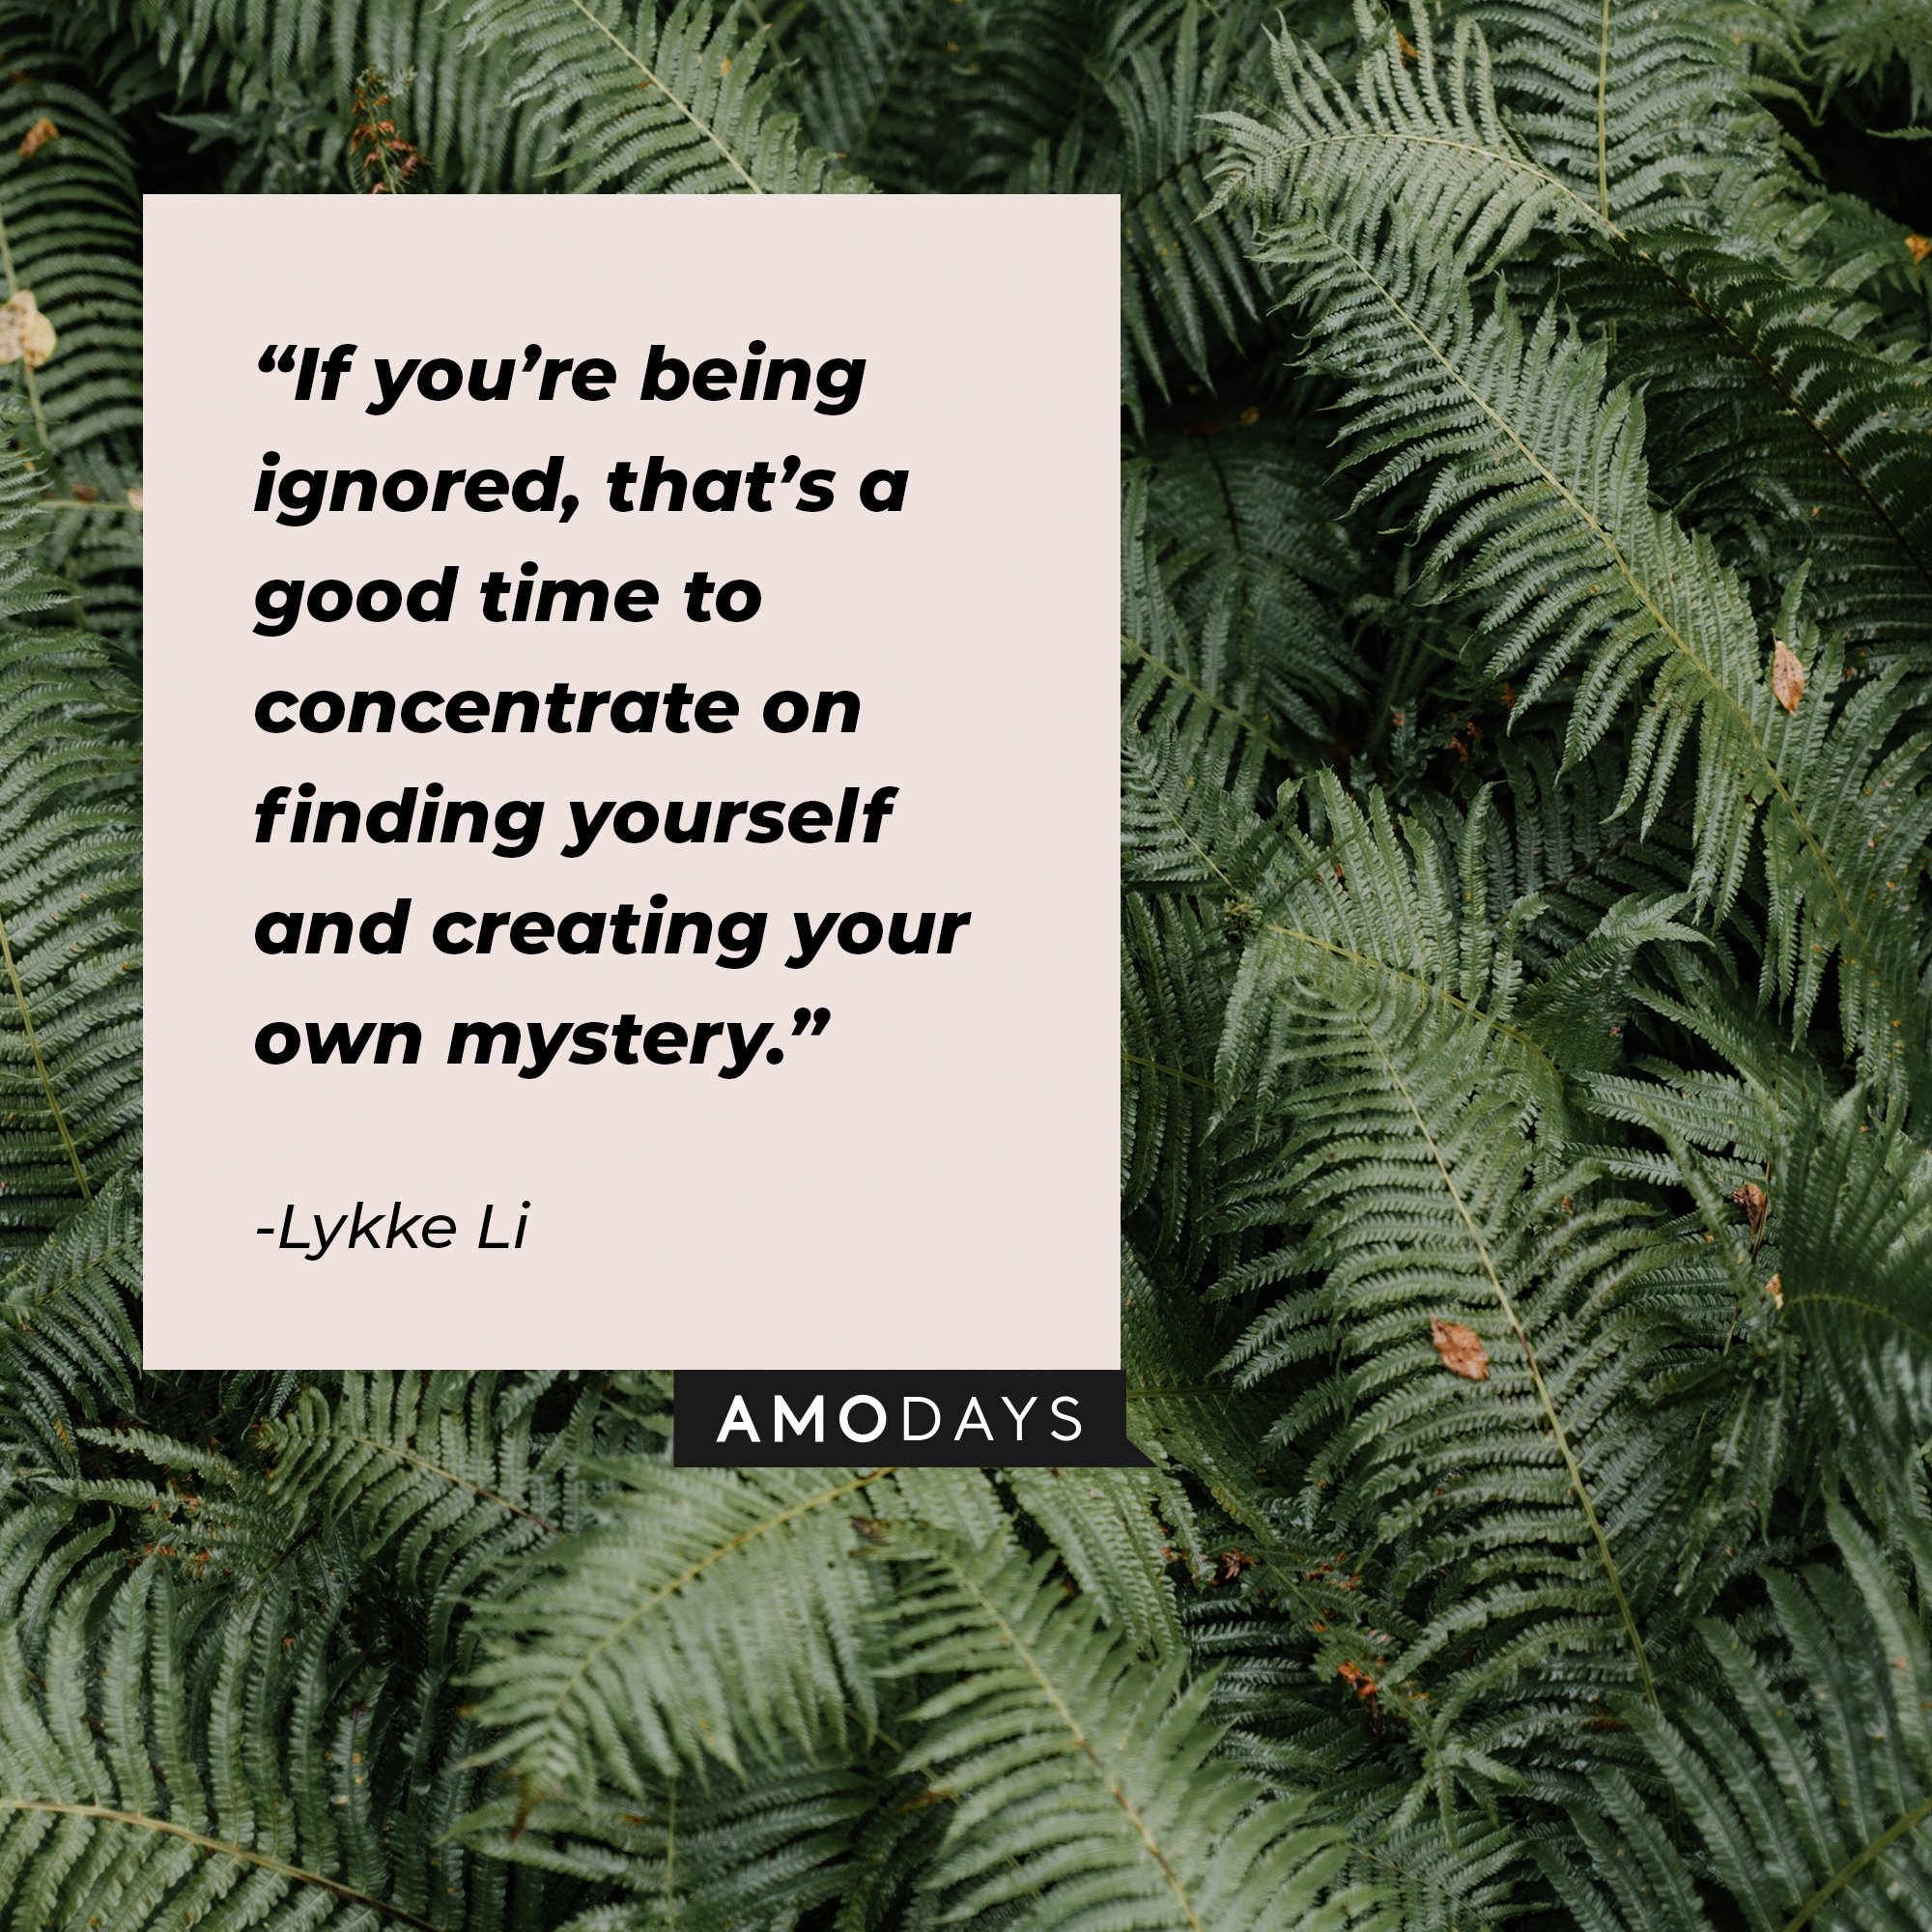 Lykke Li's quote: “If you’re being ignored, that’s a good time to concentrate on finding yourself and creating your own mystery.”  | Image: AmoDays